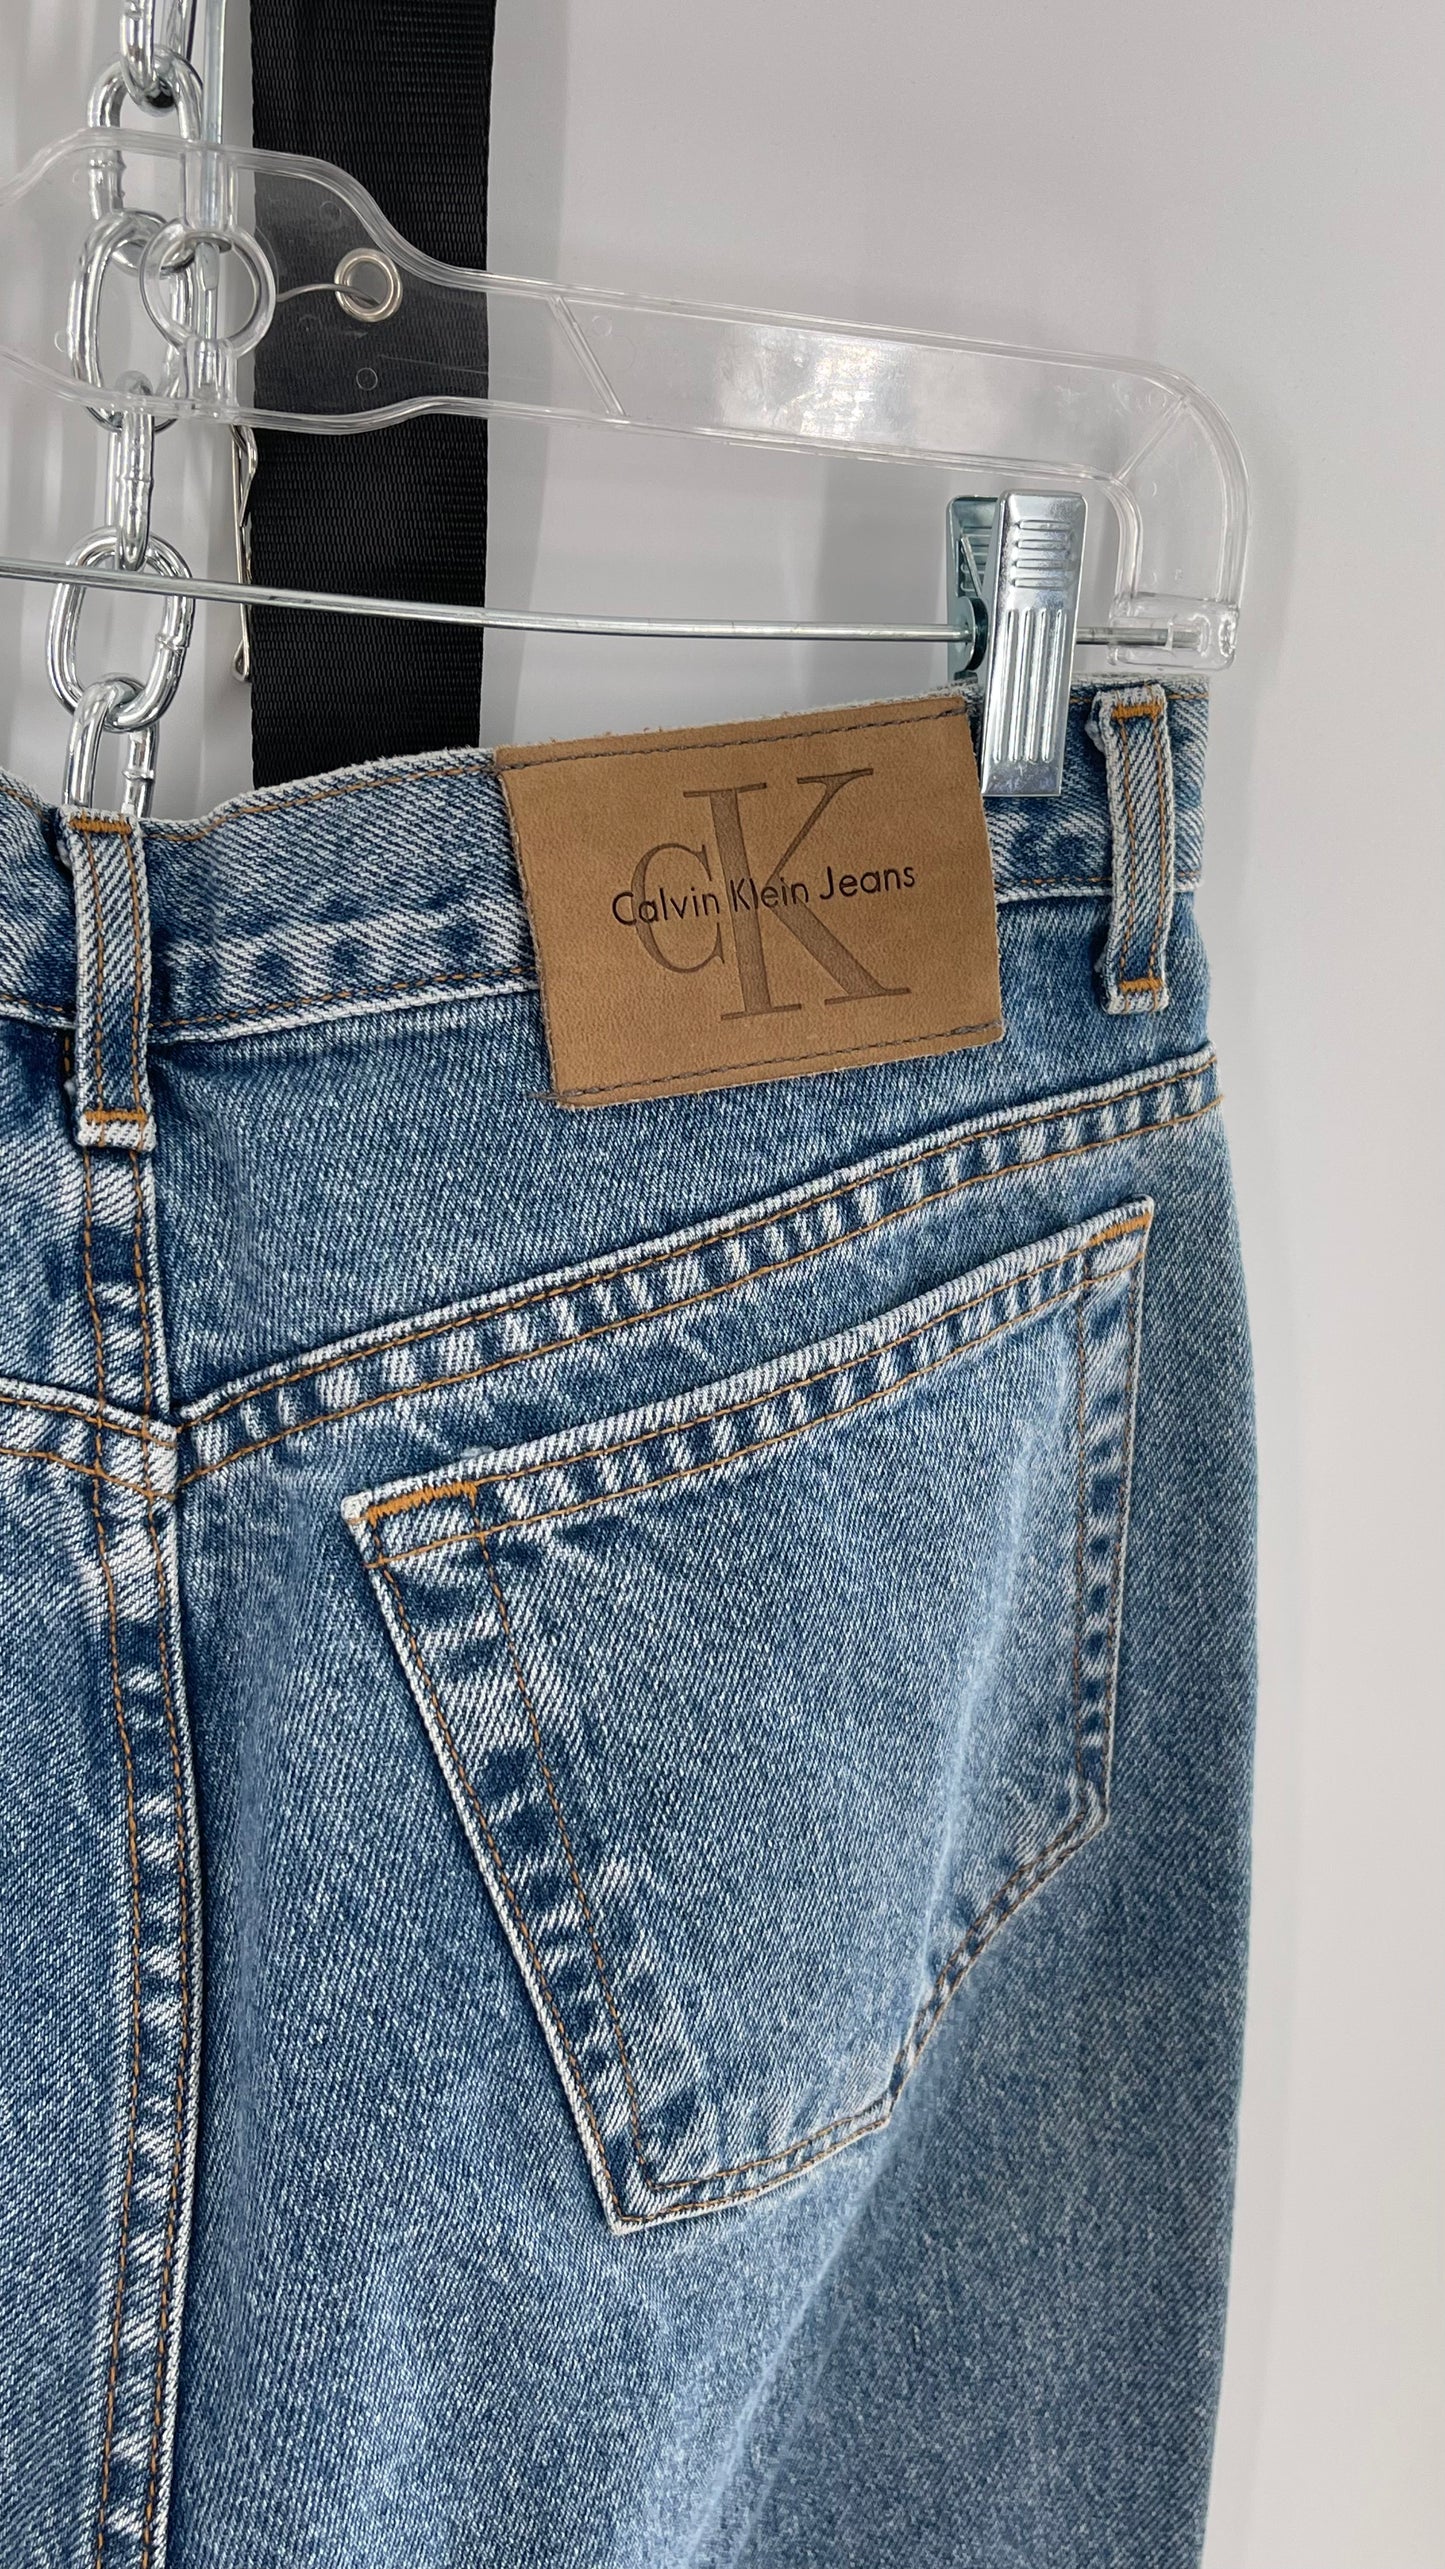 Vintage Calvin Klein Stone Washed Jeans with Silver Glitter Hem (29/30)